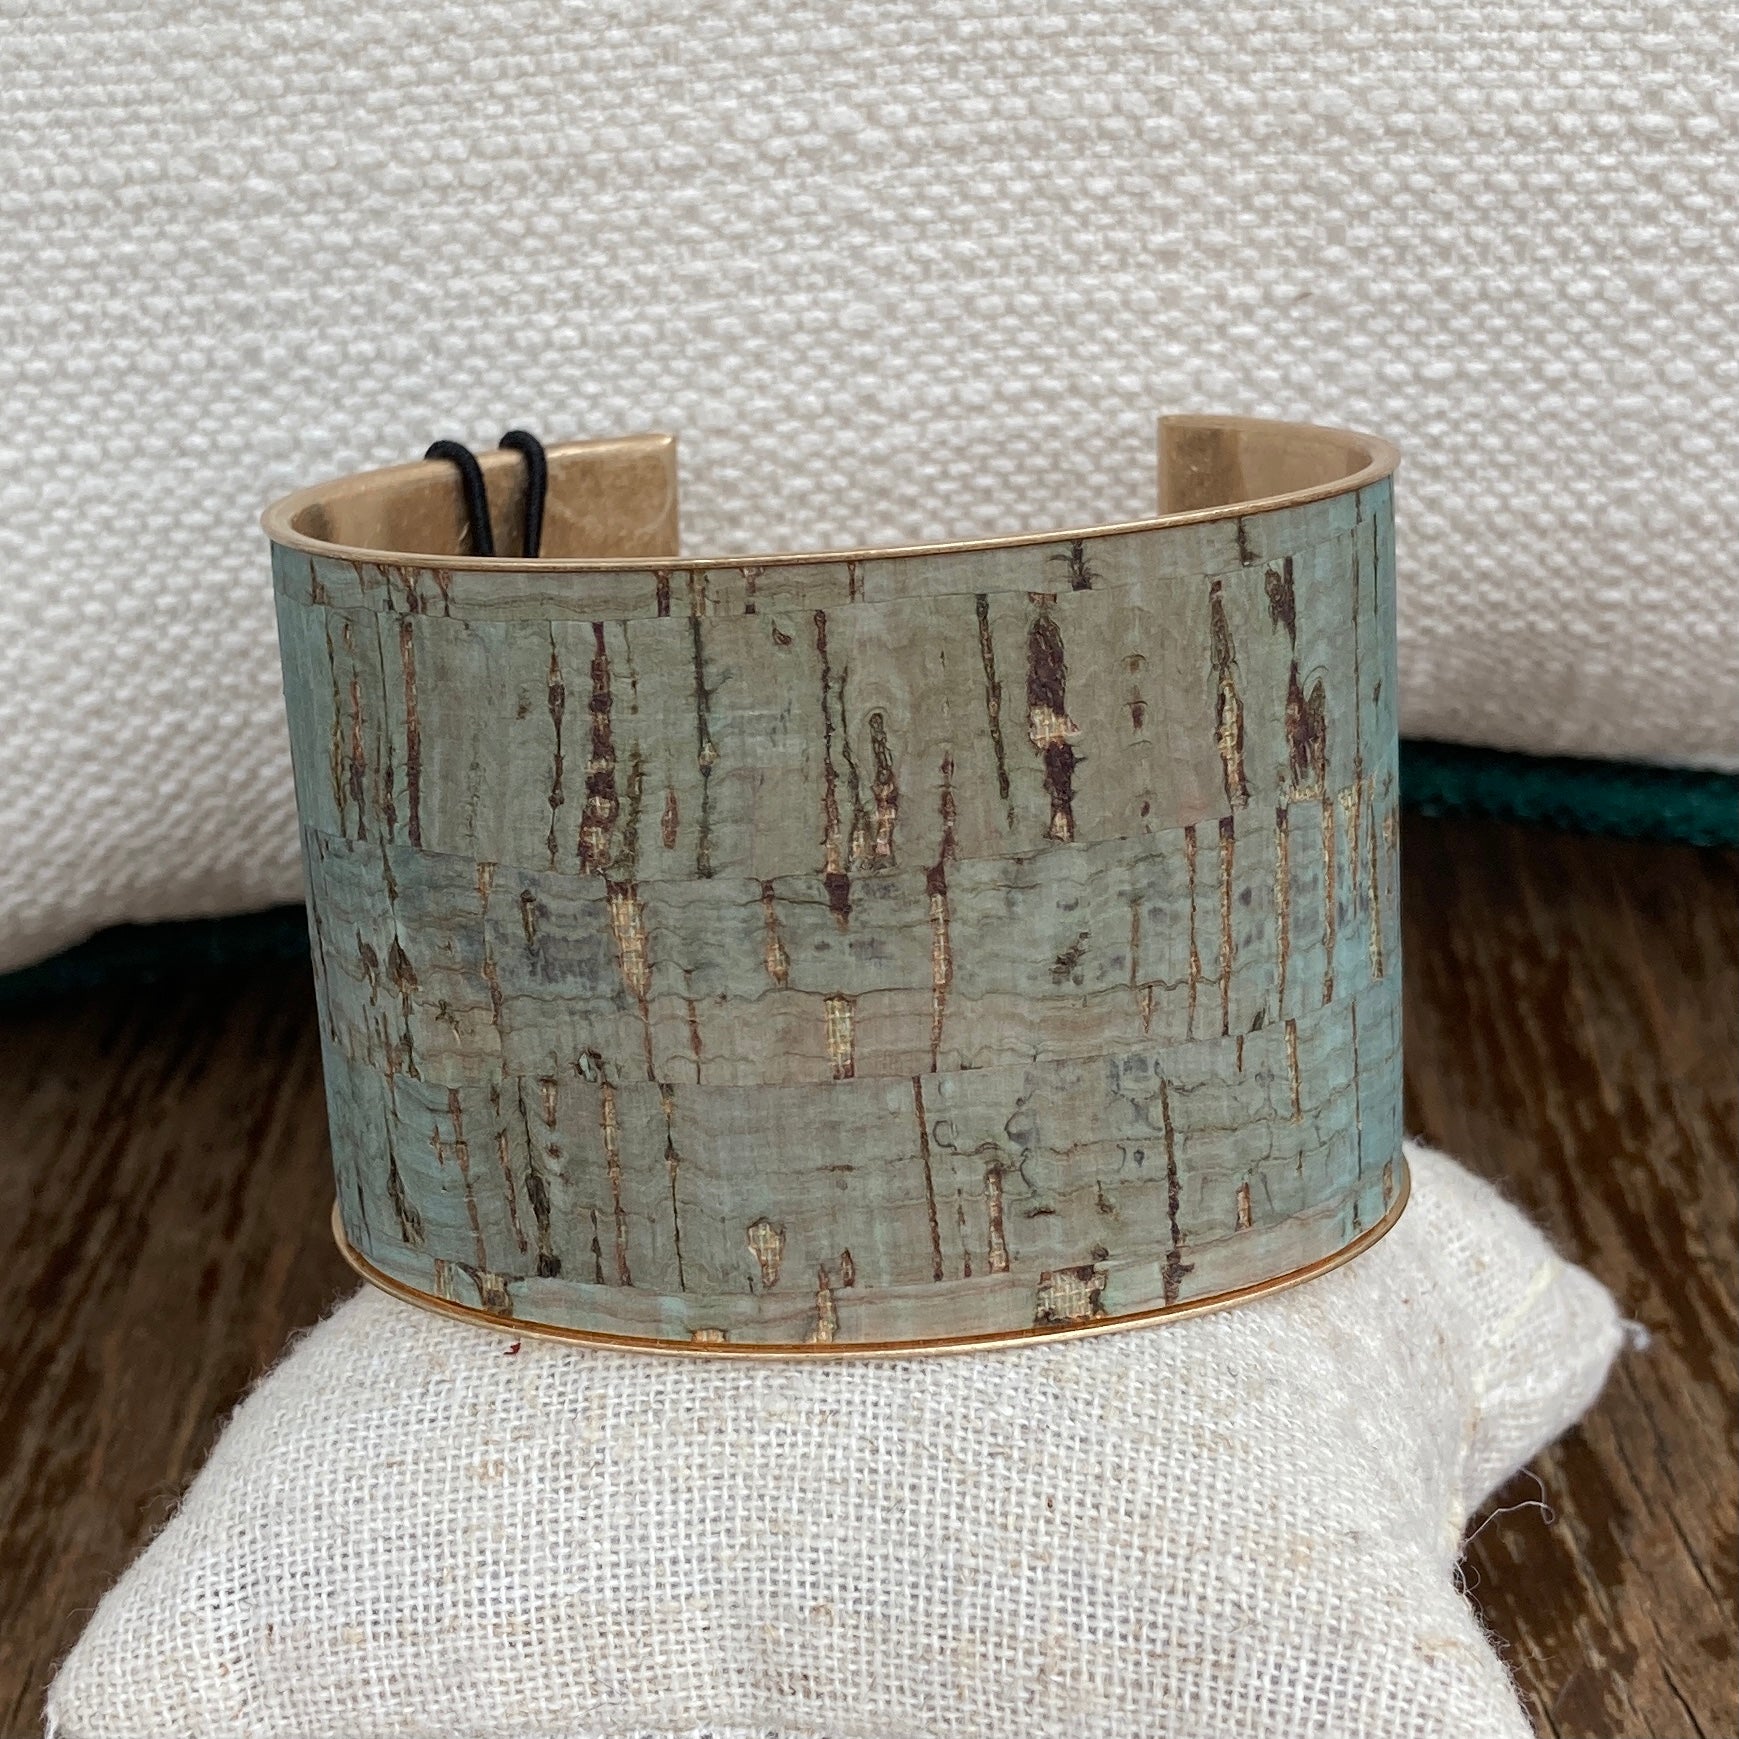 Natural Cork Cuff Bracelet available in teal with gold flecks throughout